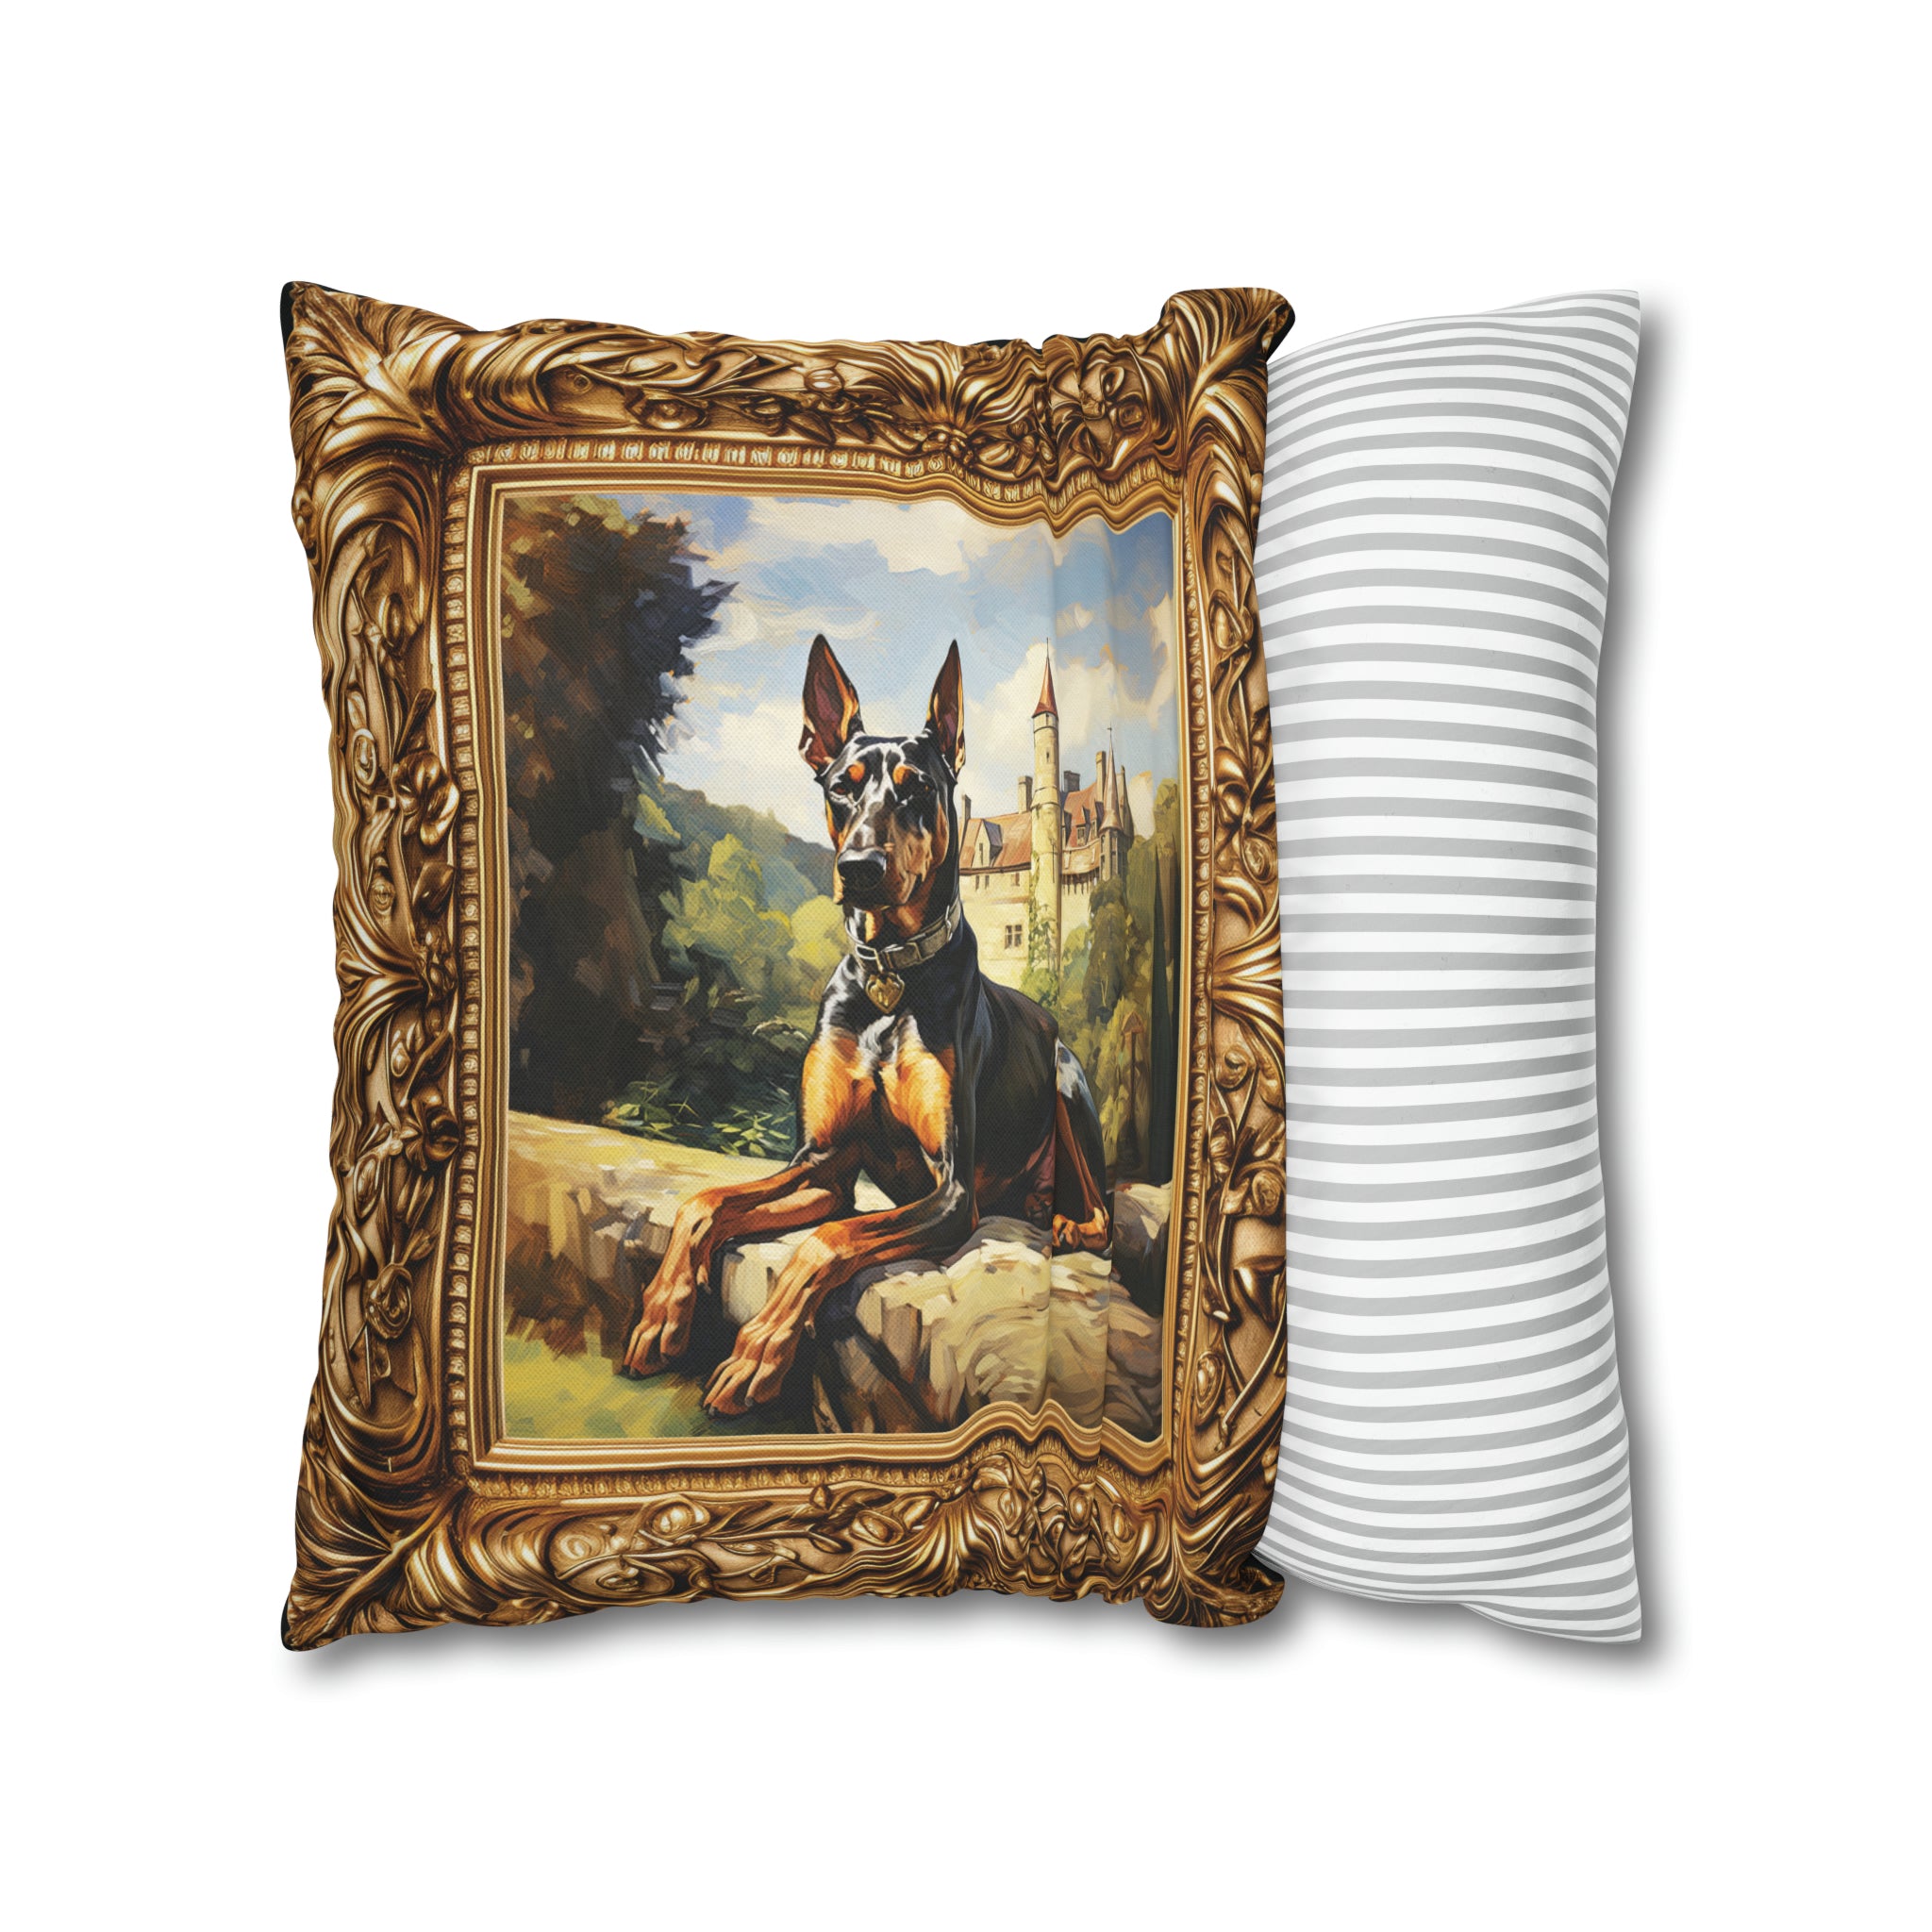 Square Pillow Case 18" x 18", CASE ONLY, no pillow form, original Art ,a Beautiful Painting of a Doberman in the English countryside.